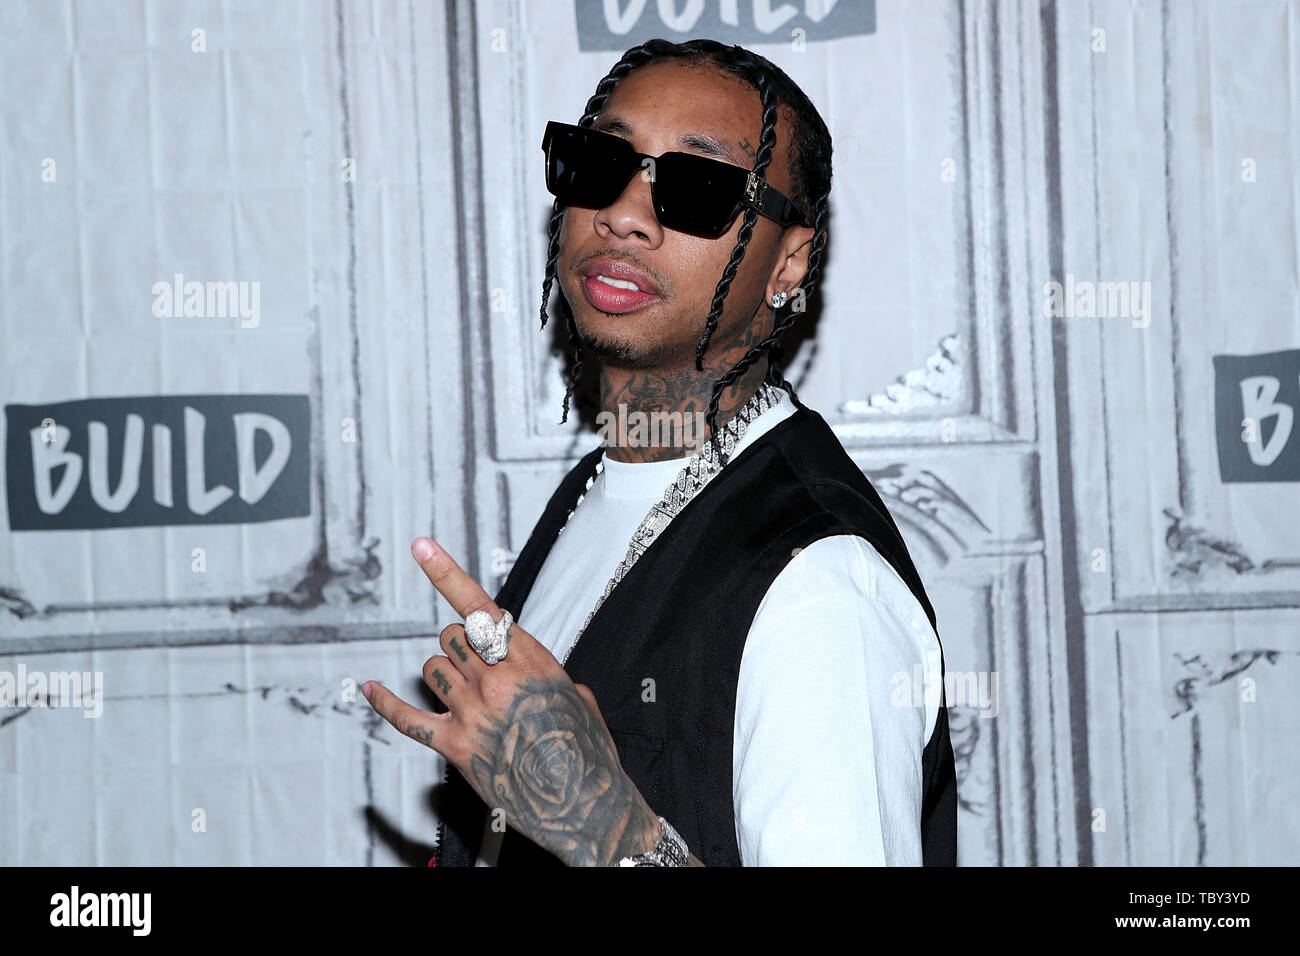 New York, USA. 3 June, 2019. Tyga at the BUILD Series with rapper Tyga discussing his current projects at BUILD Studio. Credit: Steve Mack/Alamy Live News Stock Photo